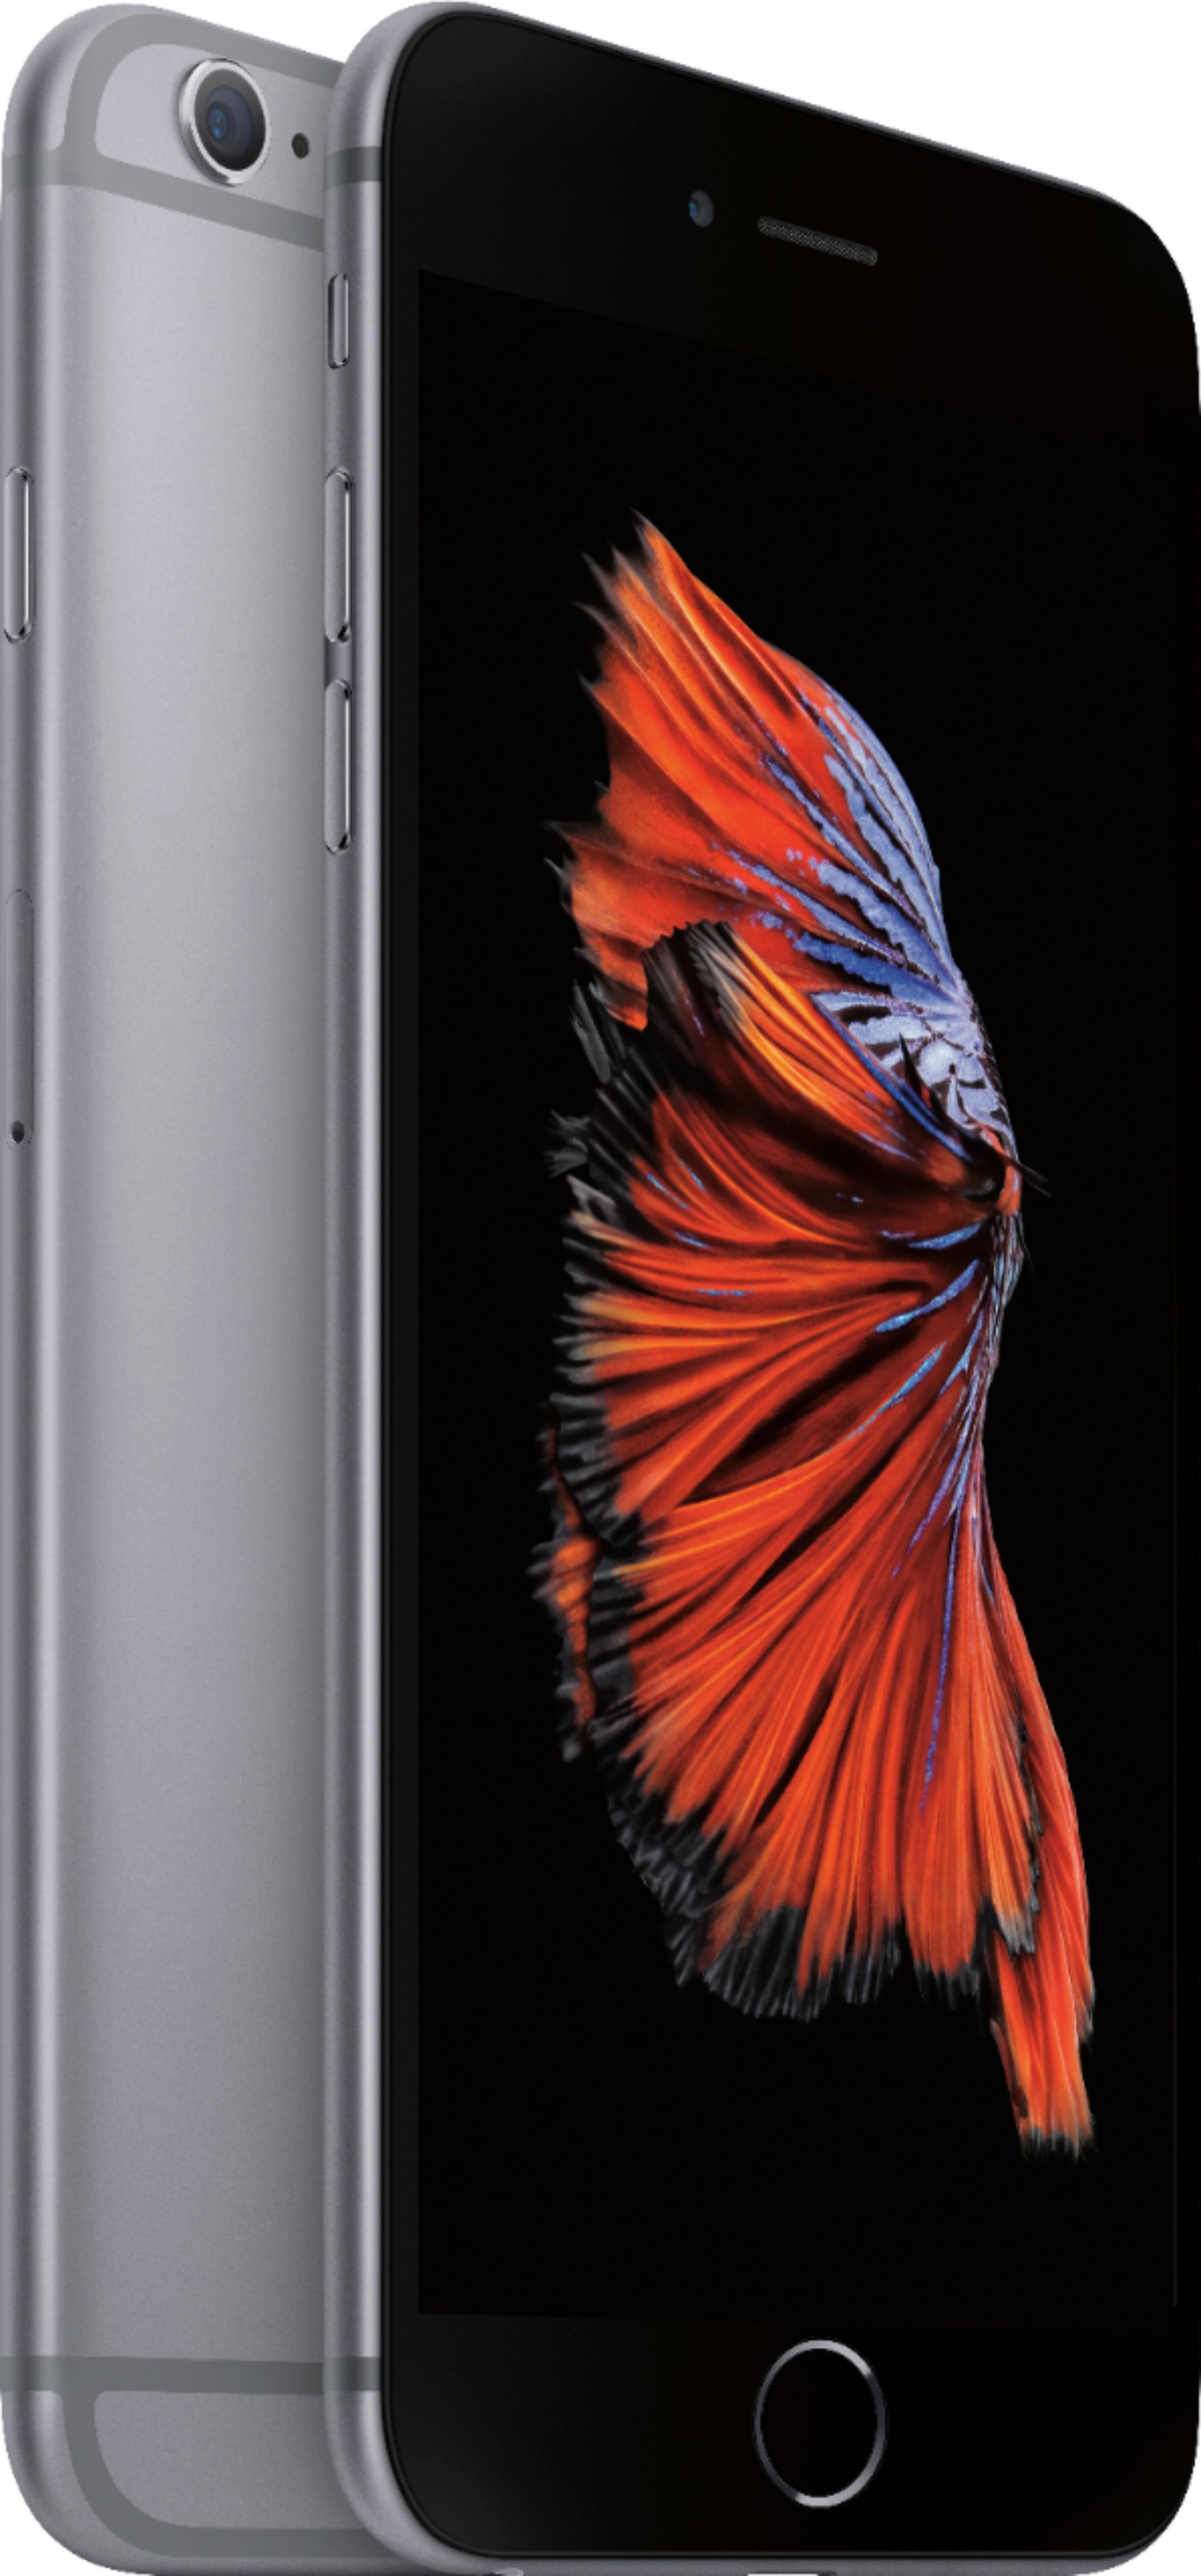 Angle View: Verizon Prepaid - Apple iPhone 6s Plus with 32GB Memory Prepaid Cell Phone - Space Gray